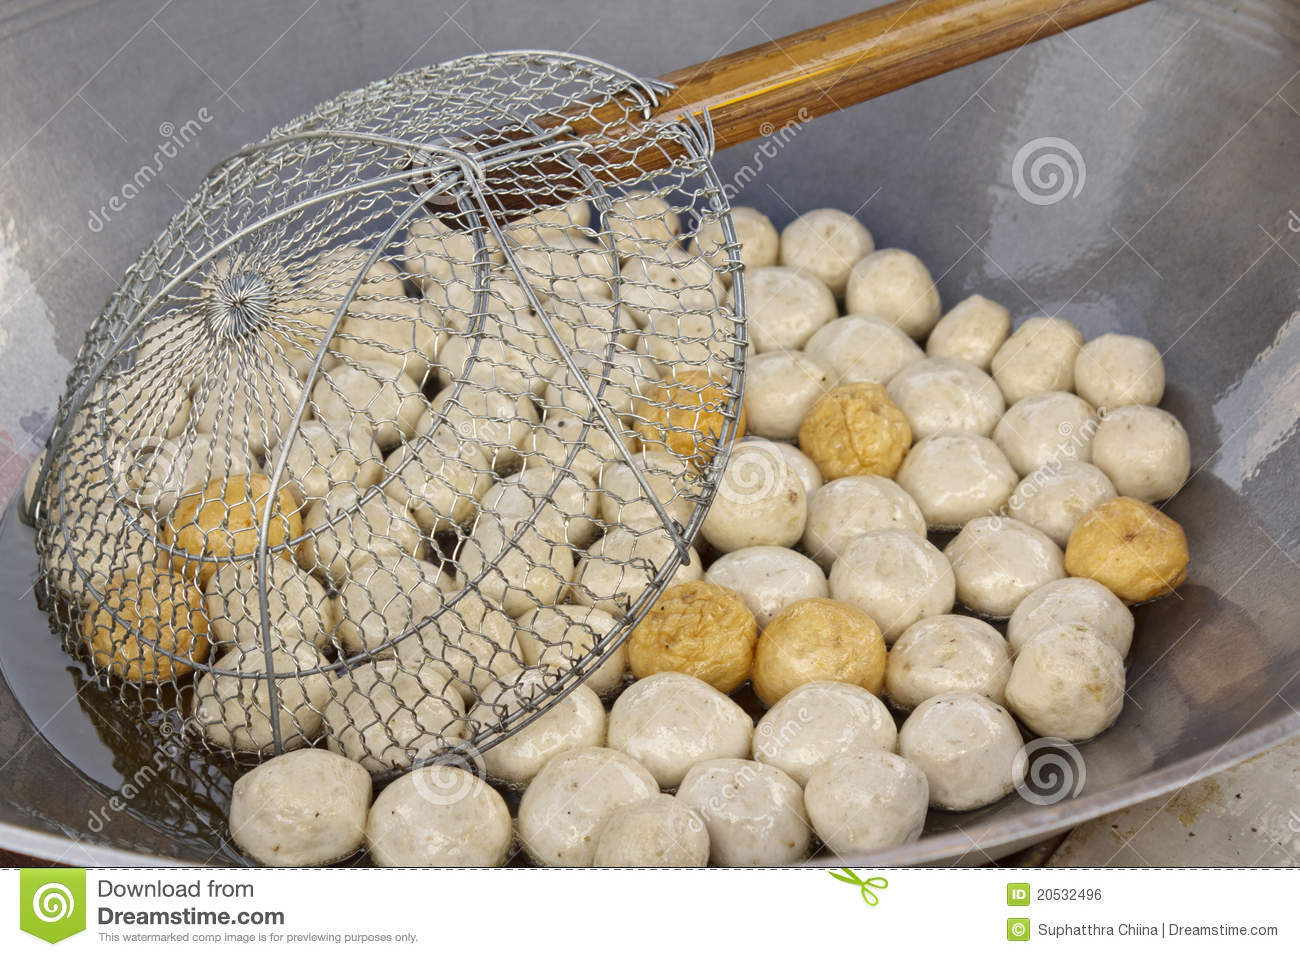 Fish Meat Ball Royalty Free Stock Image   Image  20532496